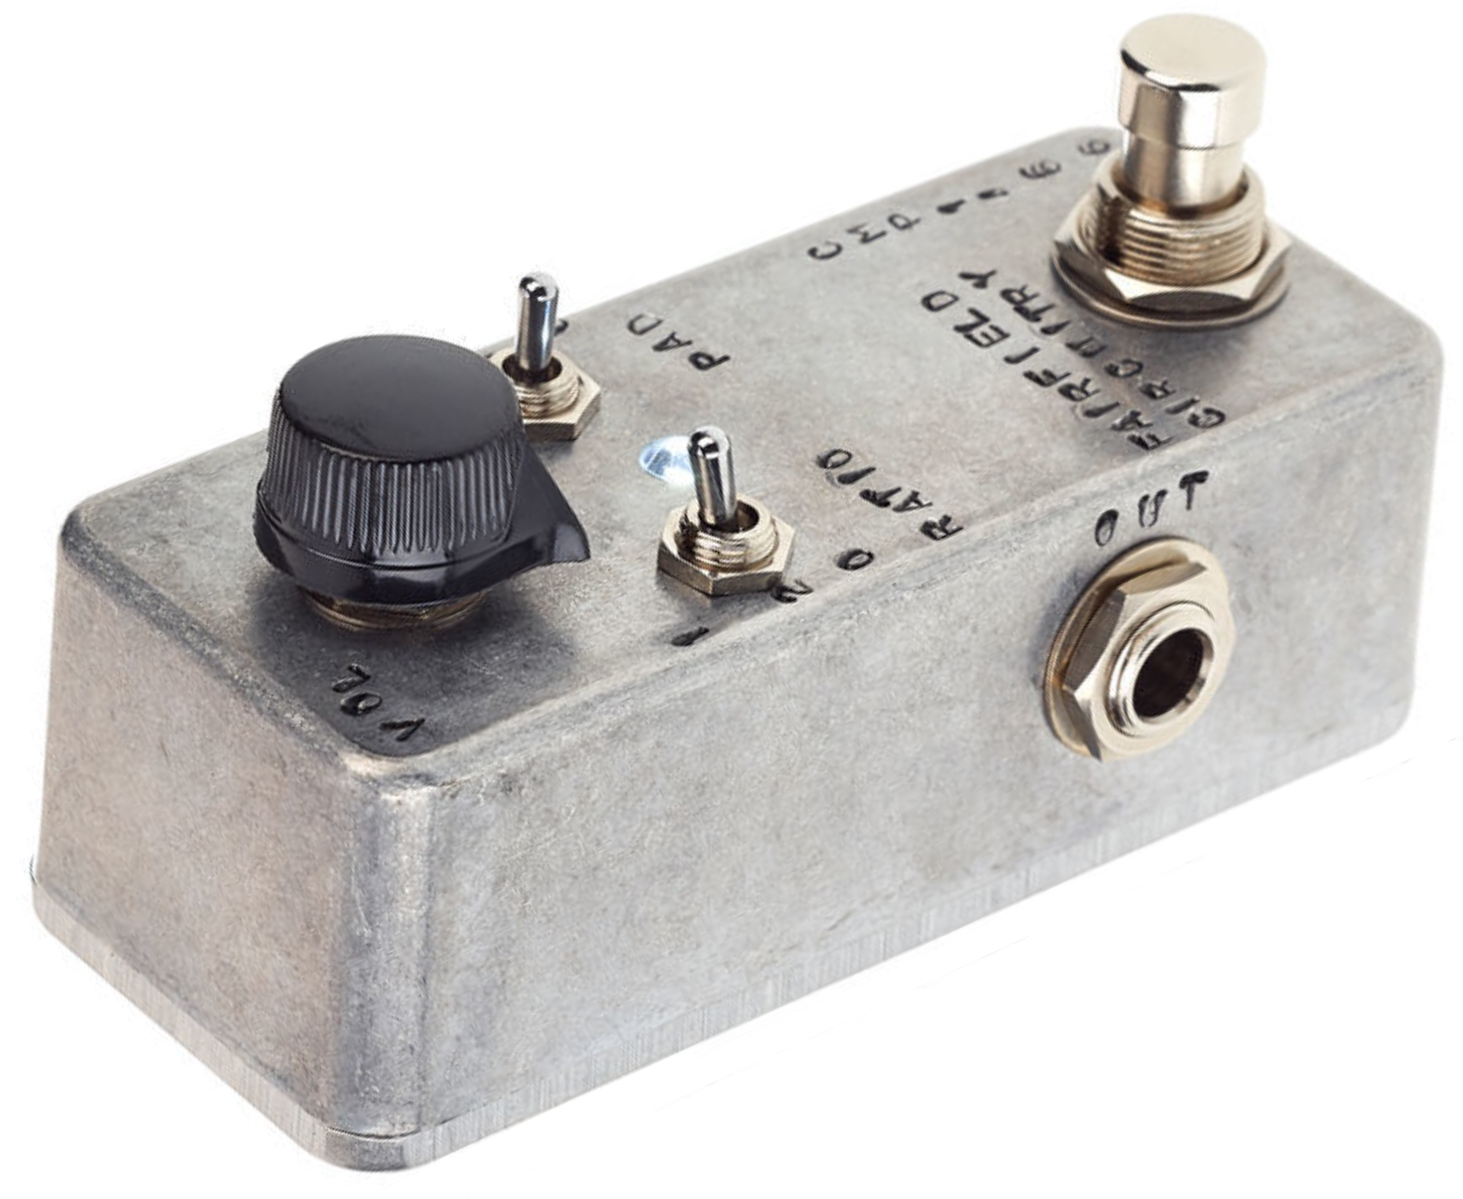 Fairfield Circuitry The Accountant Compressor - PÉdale Compression / Sustain / Noise Gate - Variation 2